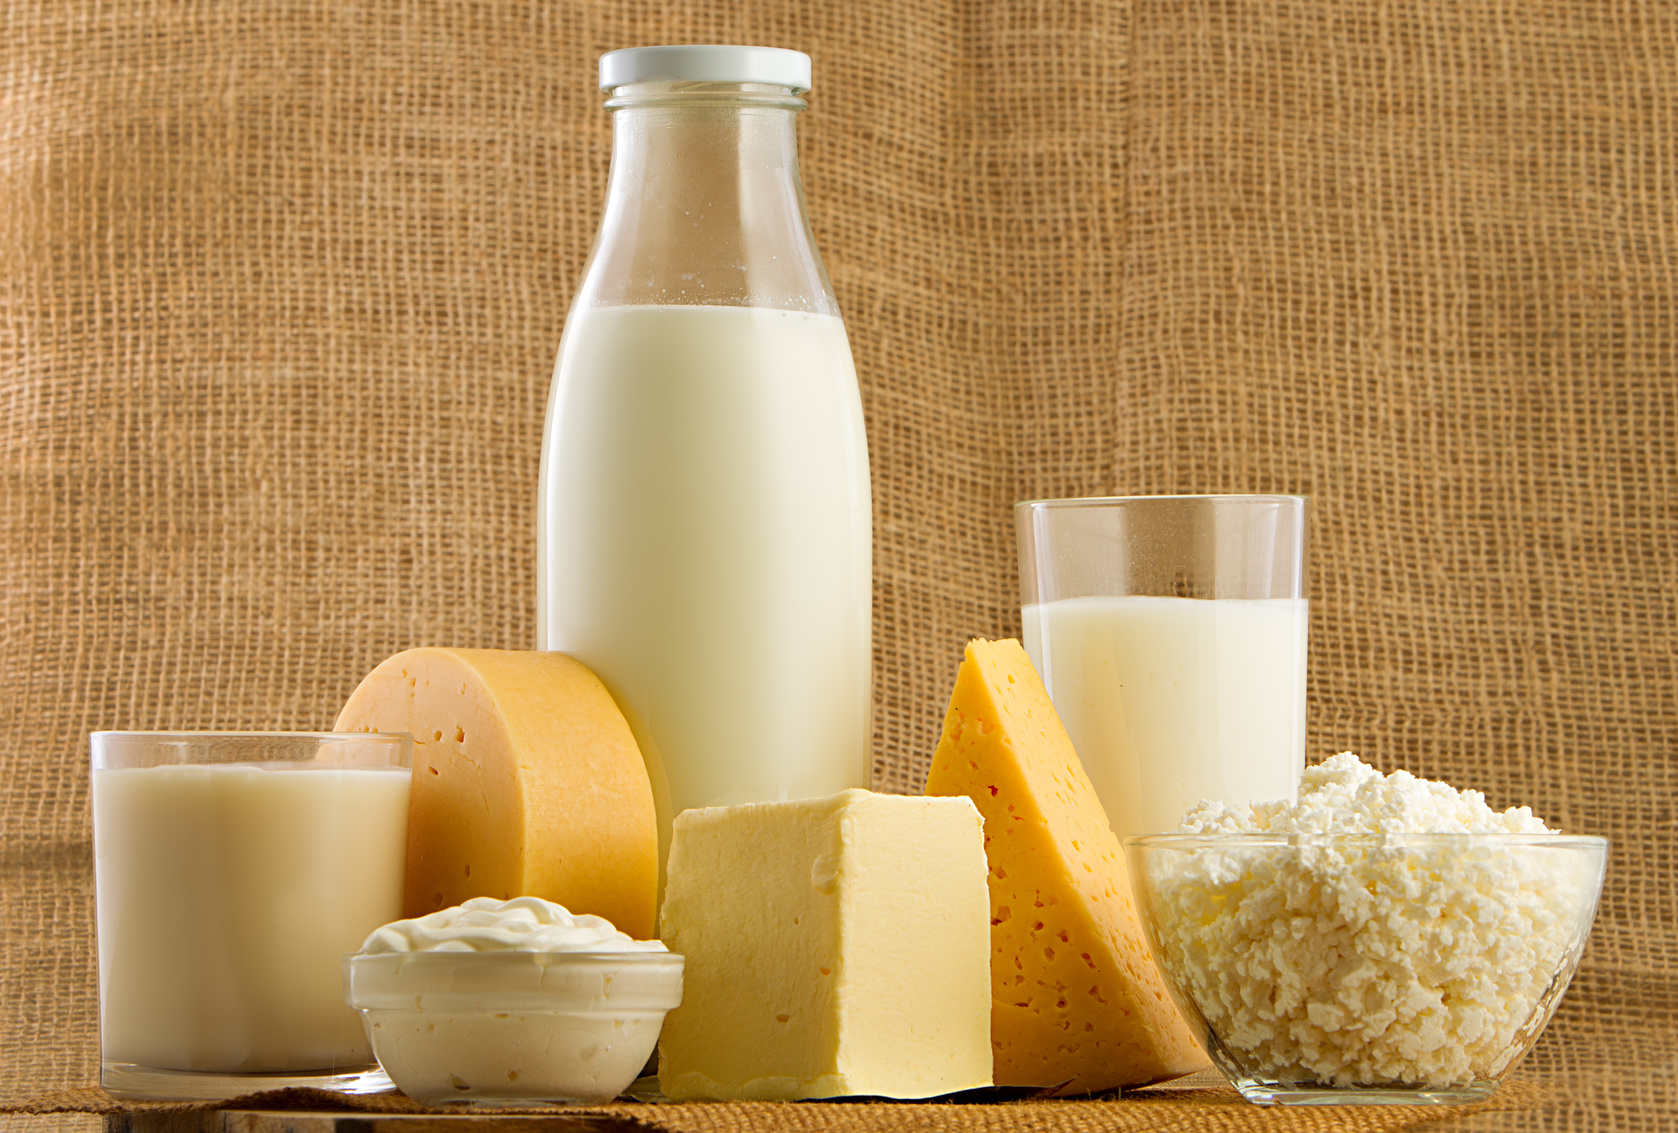 Kazakhstan will be fully self-sufficient in dairy products by 2024